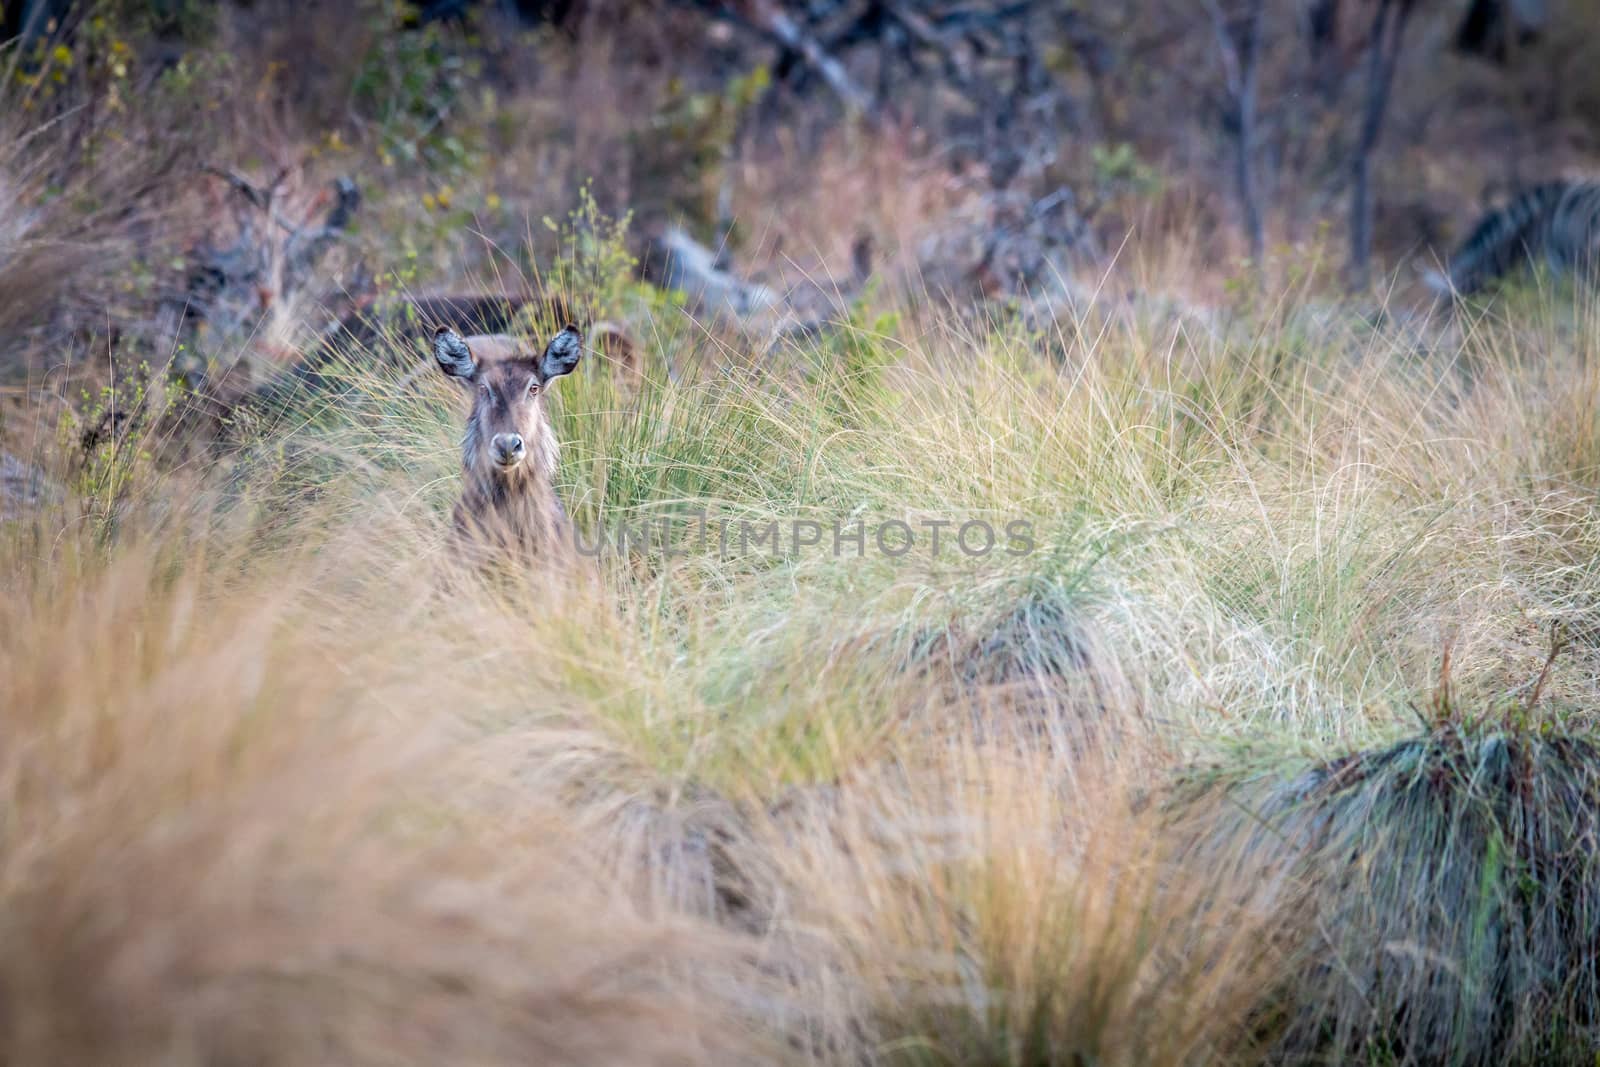 Waterbuck starring from behind the high grass. by Simoneemanphotography